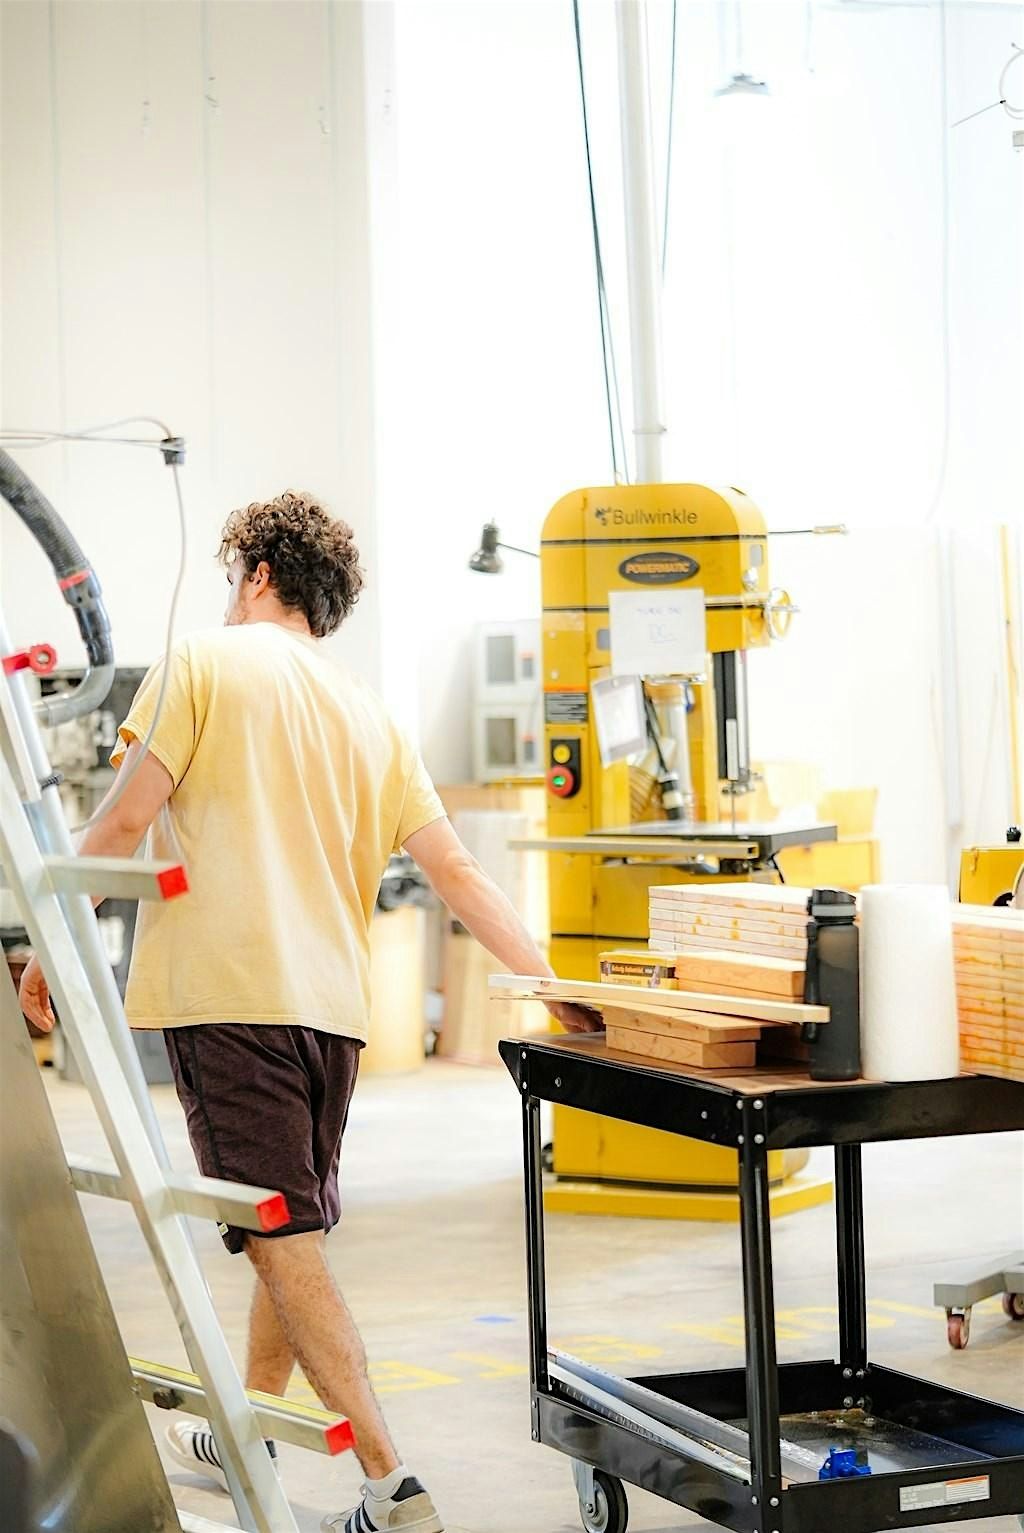 Rough to Smooth: Using the Miter Saw, Bandsaw, Jointer, Planer and Sanders